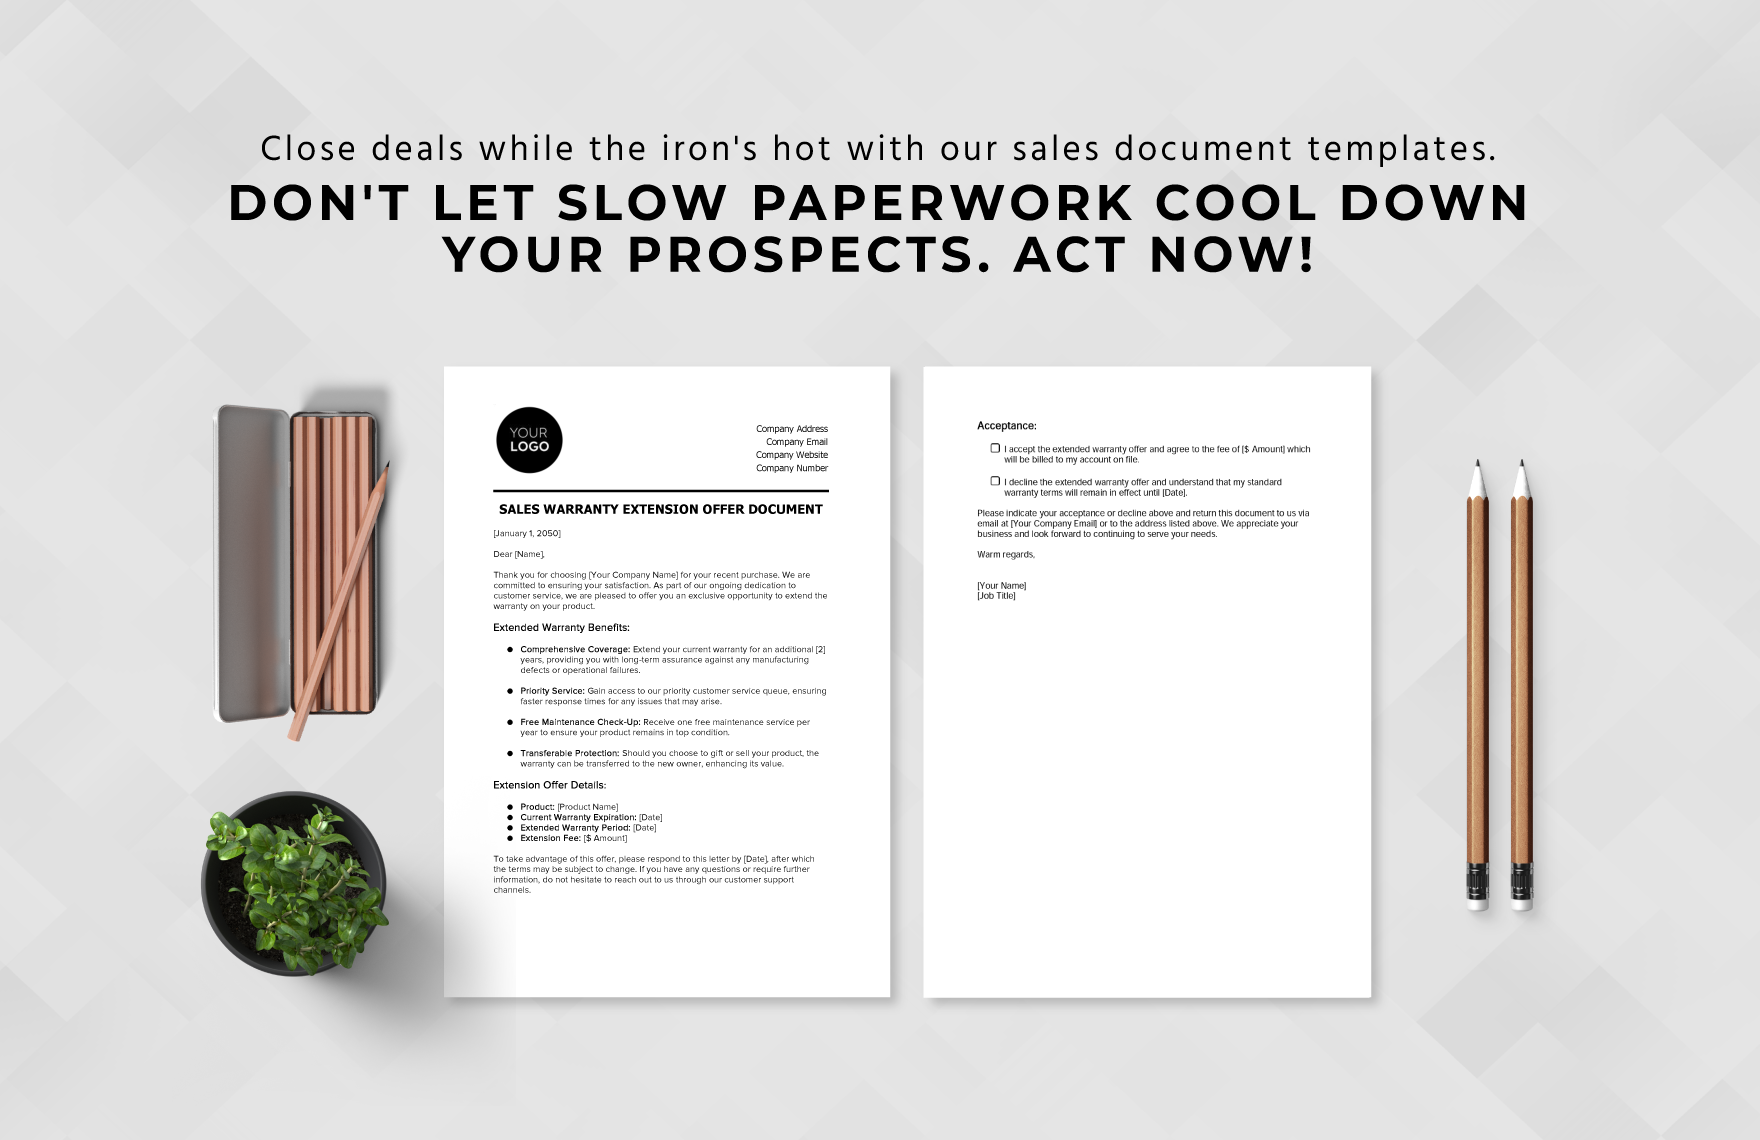 Sales Warranty Extension Offer Document Template